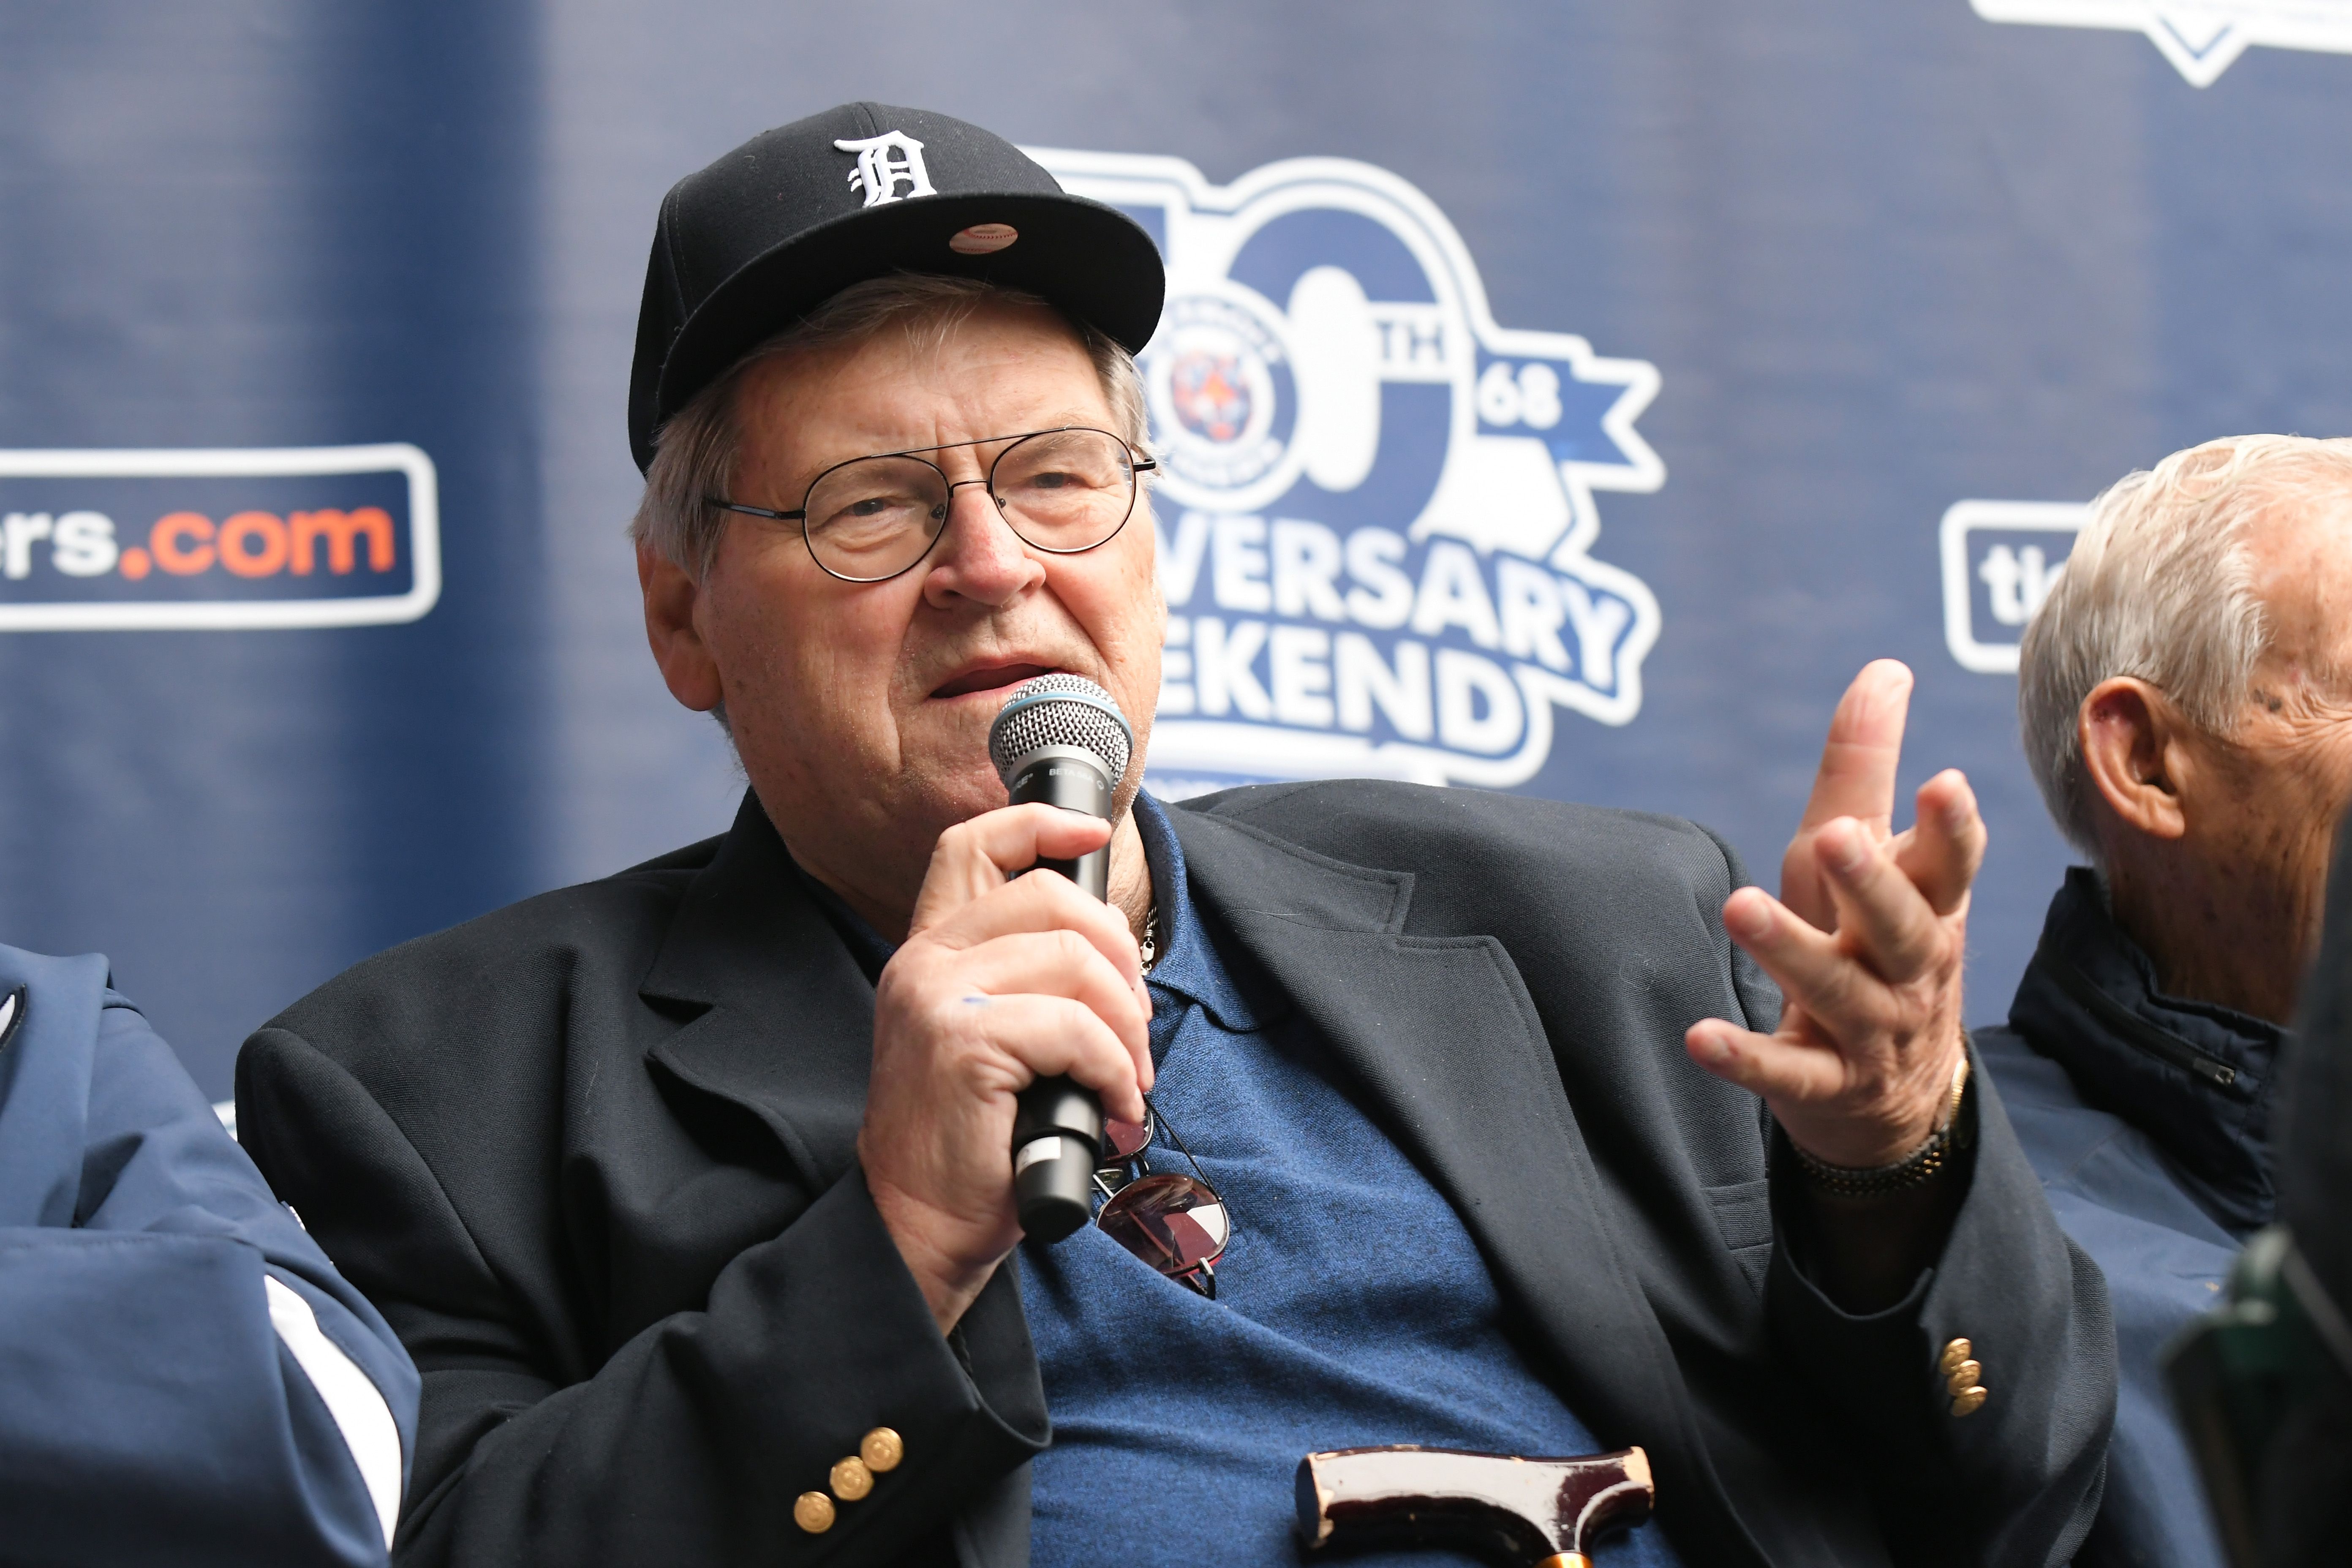 Denny McLain talks to the crowd during a Q & A session to honor the 50th anniversary of the 1968 Tigers Worlds Championship prior to the game against the St. Louis Cardinals at Comerica Park on September 9, 2018 in Detroit, Michigan. | Source: Getty Images